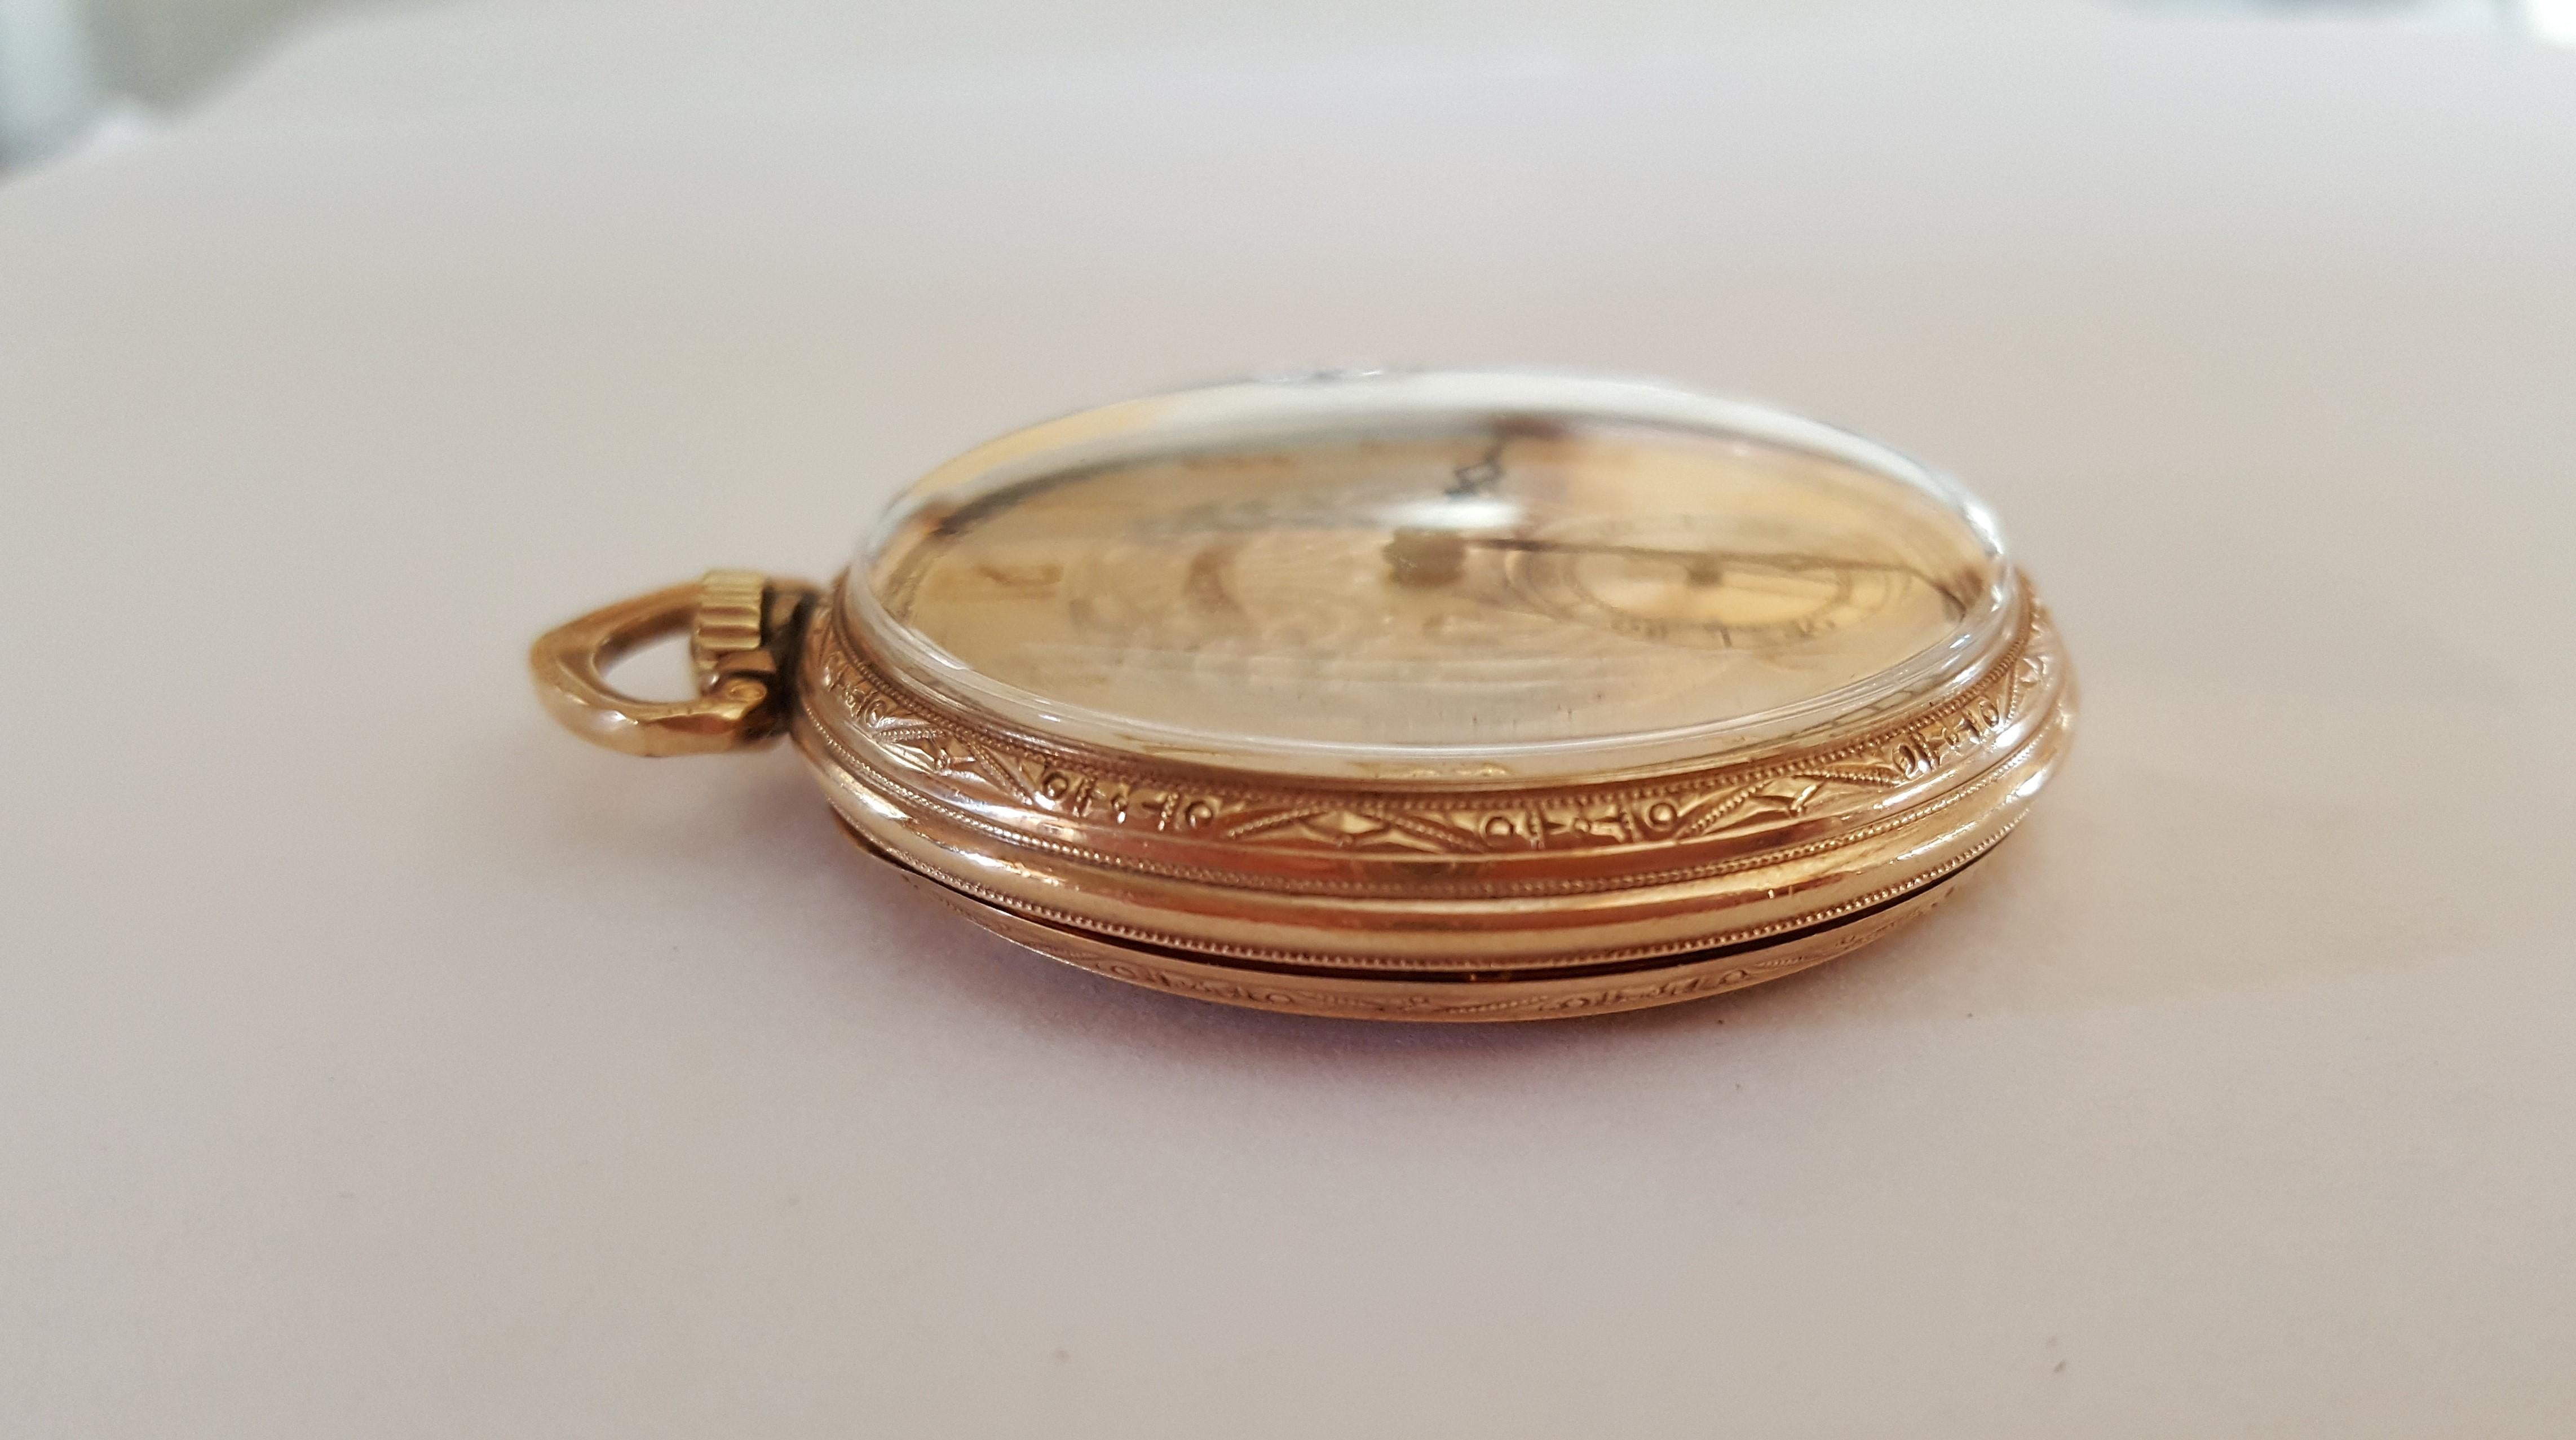 Vintage 1922 Illinois 10kt Gold Pocket Watch, Works, Excellent Condition, Santa Fe Special, 21 Jewel, Illinois Watch Co. This watch is considered a dress watch with beautiful designs and engraving on the face and case of the watch,